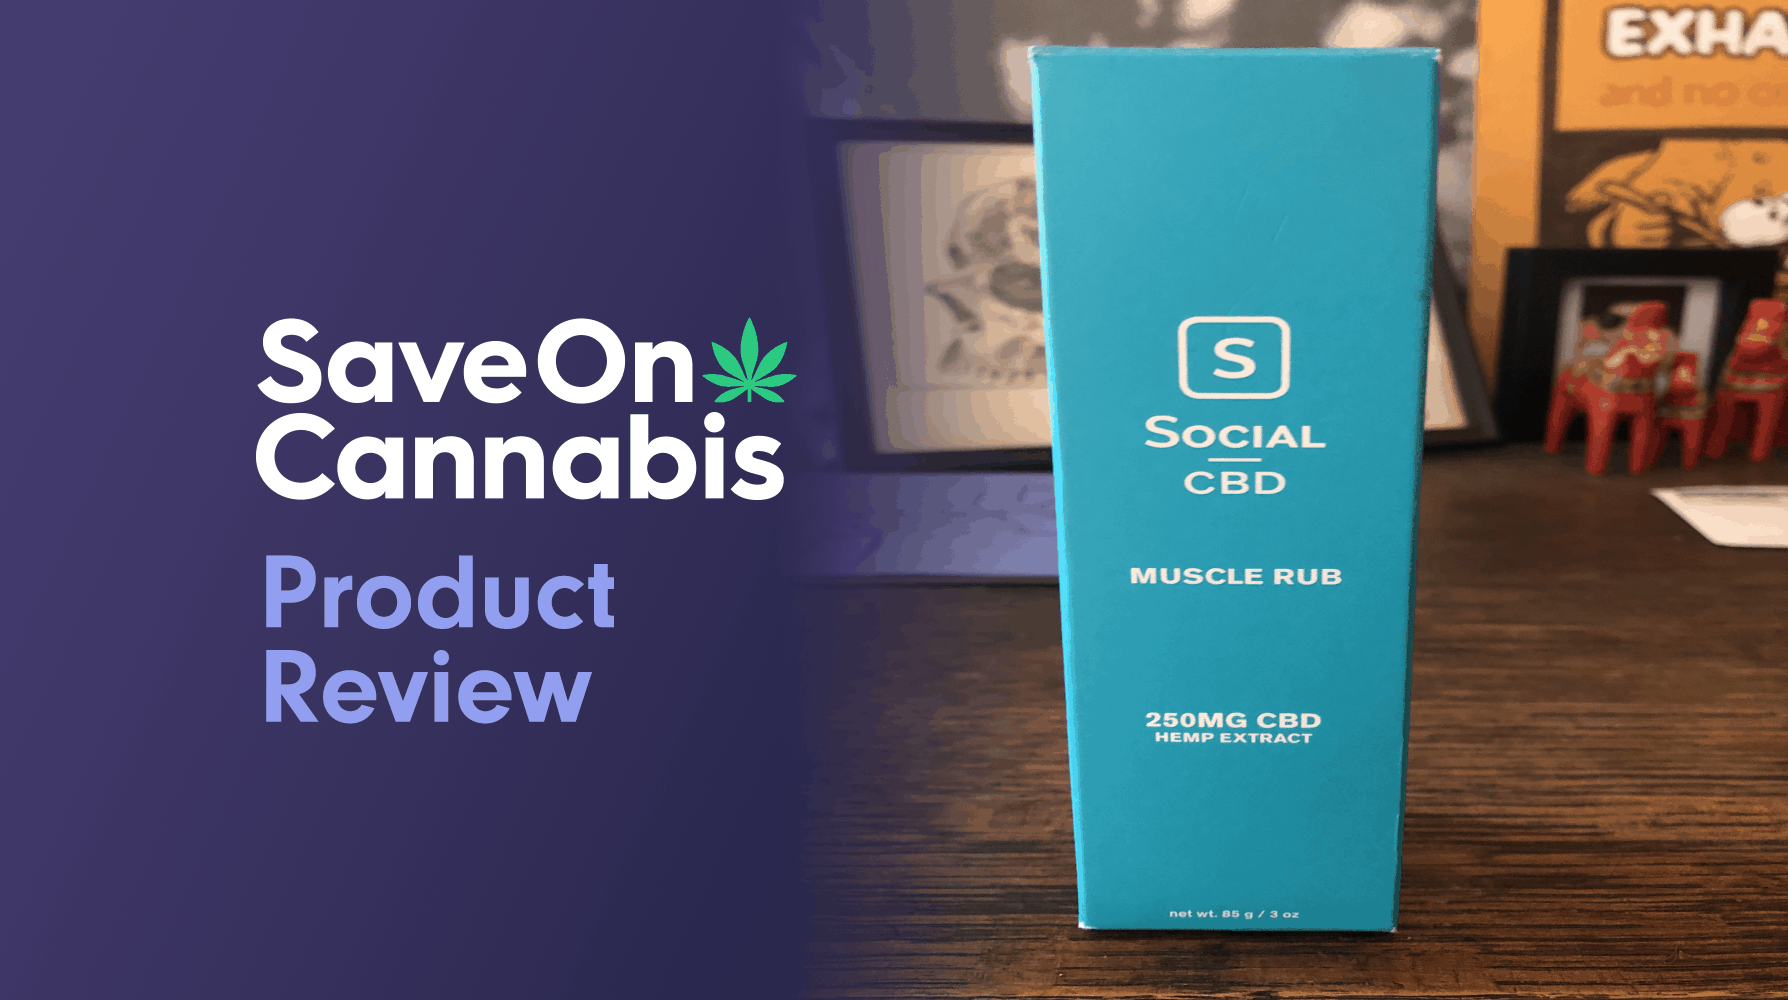 social cbd muscle rub review save on cannabis website